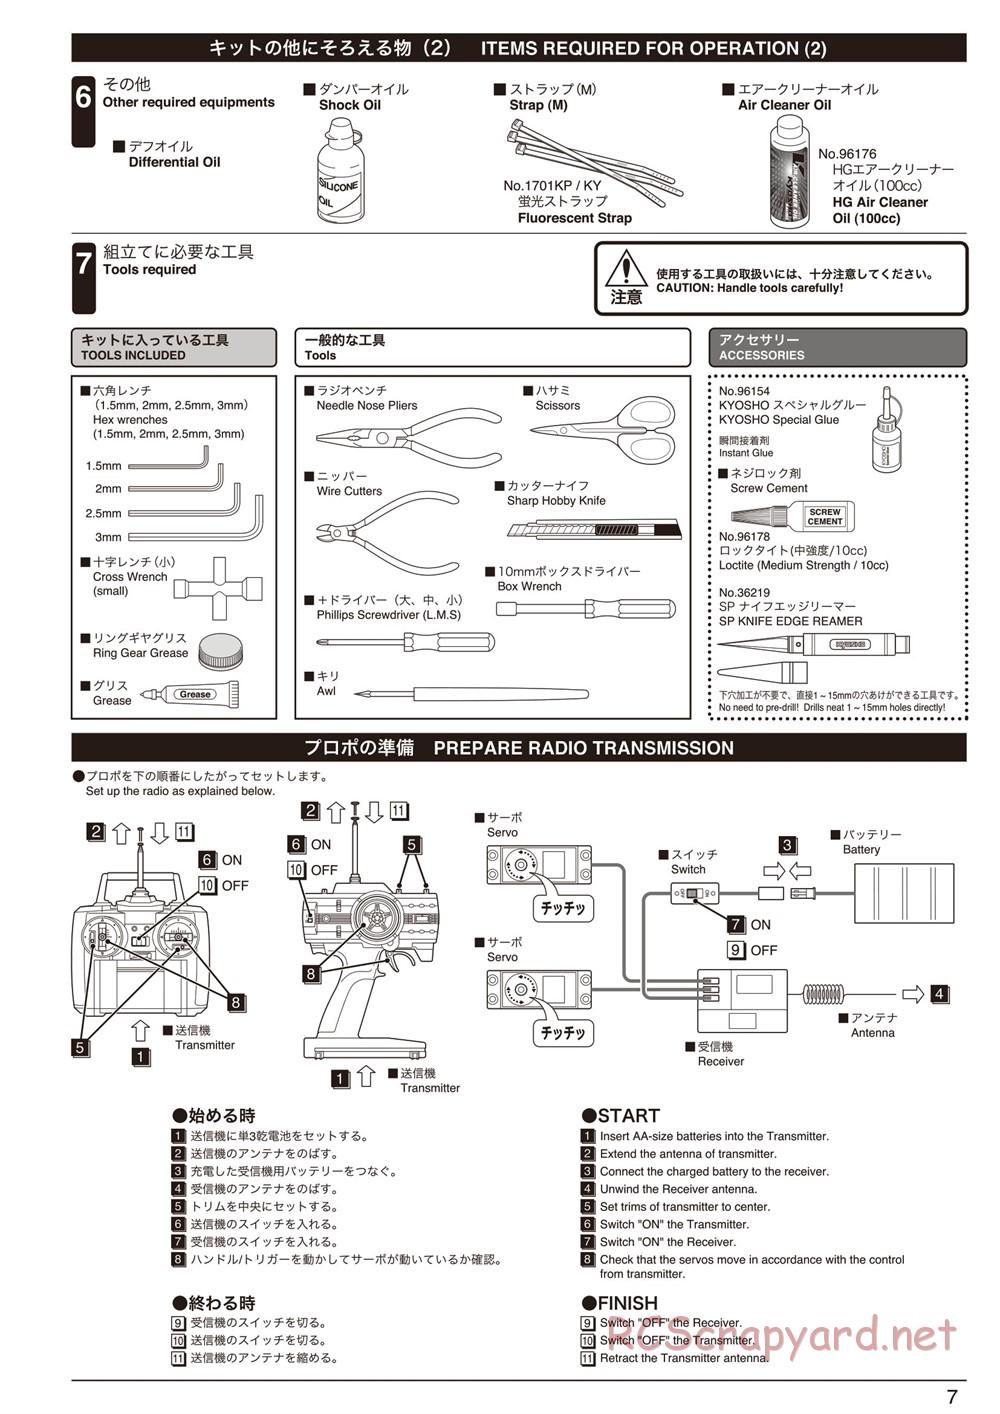 Kyosho - Inferno ST-RR Evo.2 - Manual - Page 11